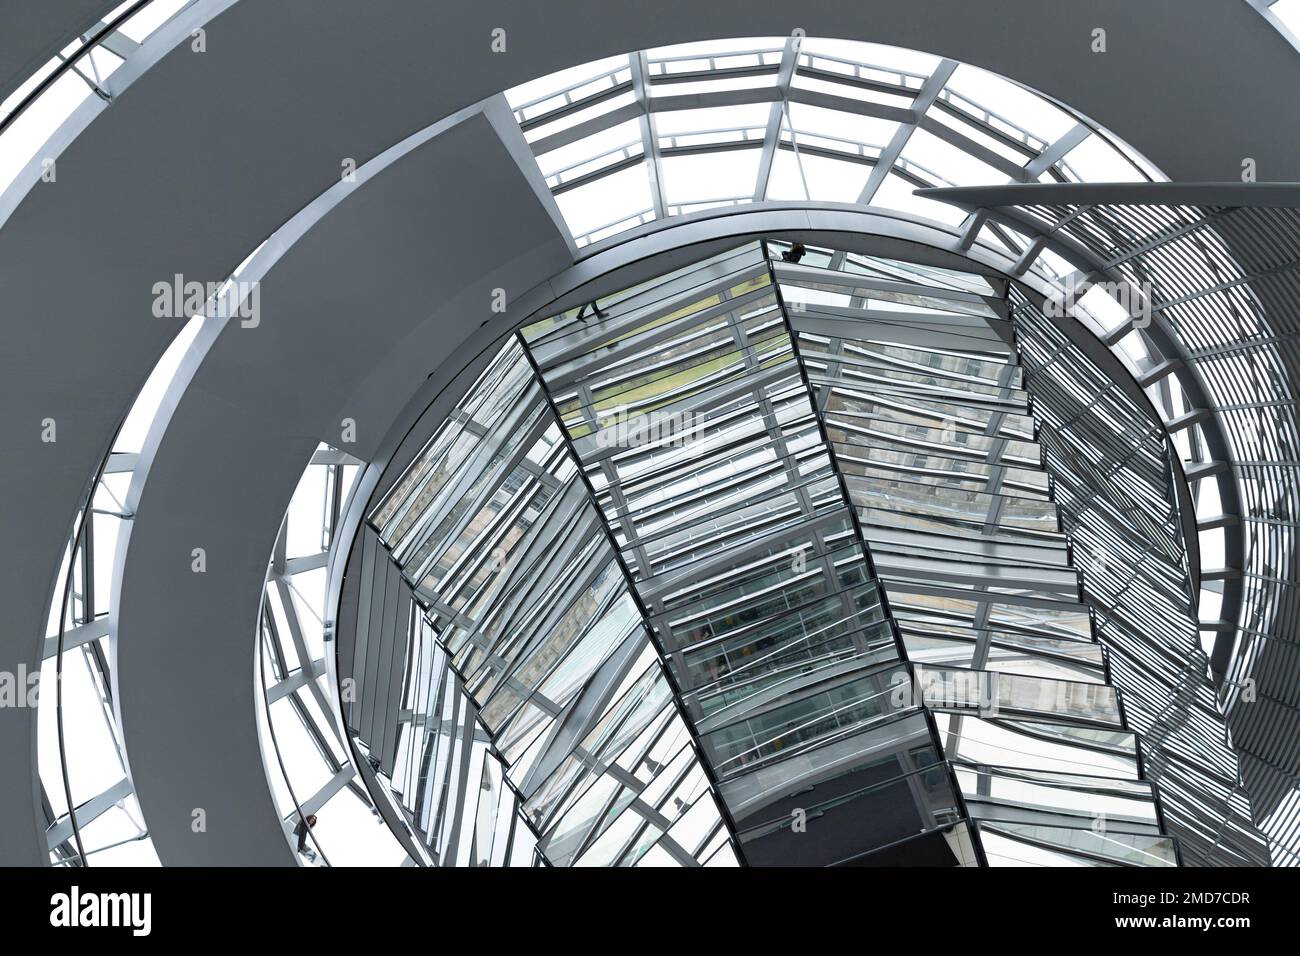 Inside the Bundestag dome. Tourists visit the parliament building of German government. Reichstag new dome interior. Stock Photo